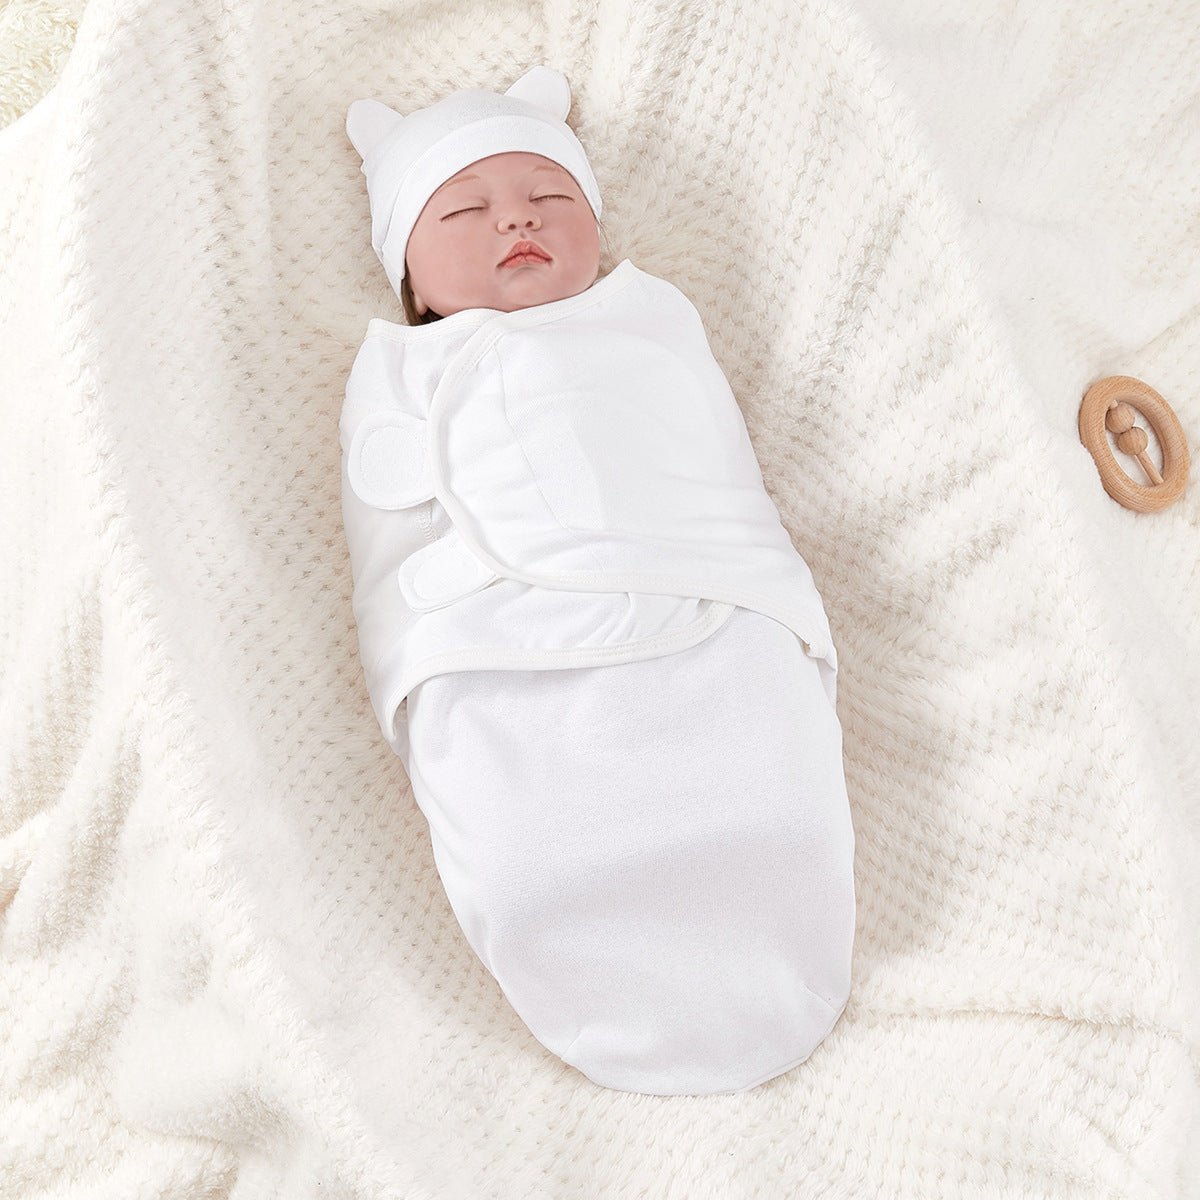 Anti-startle Swaddling Cotton Baby Sleeping Bag - Cute Cubs